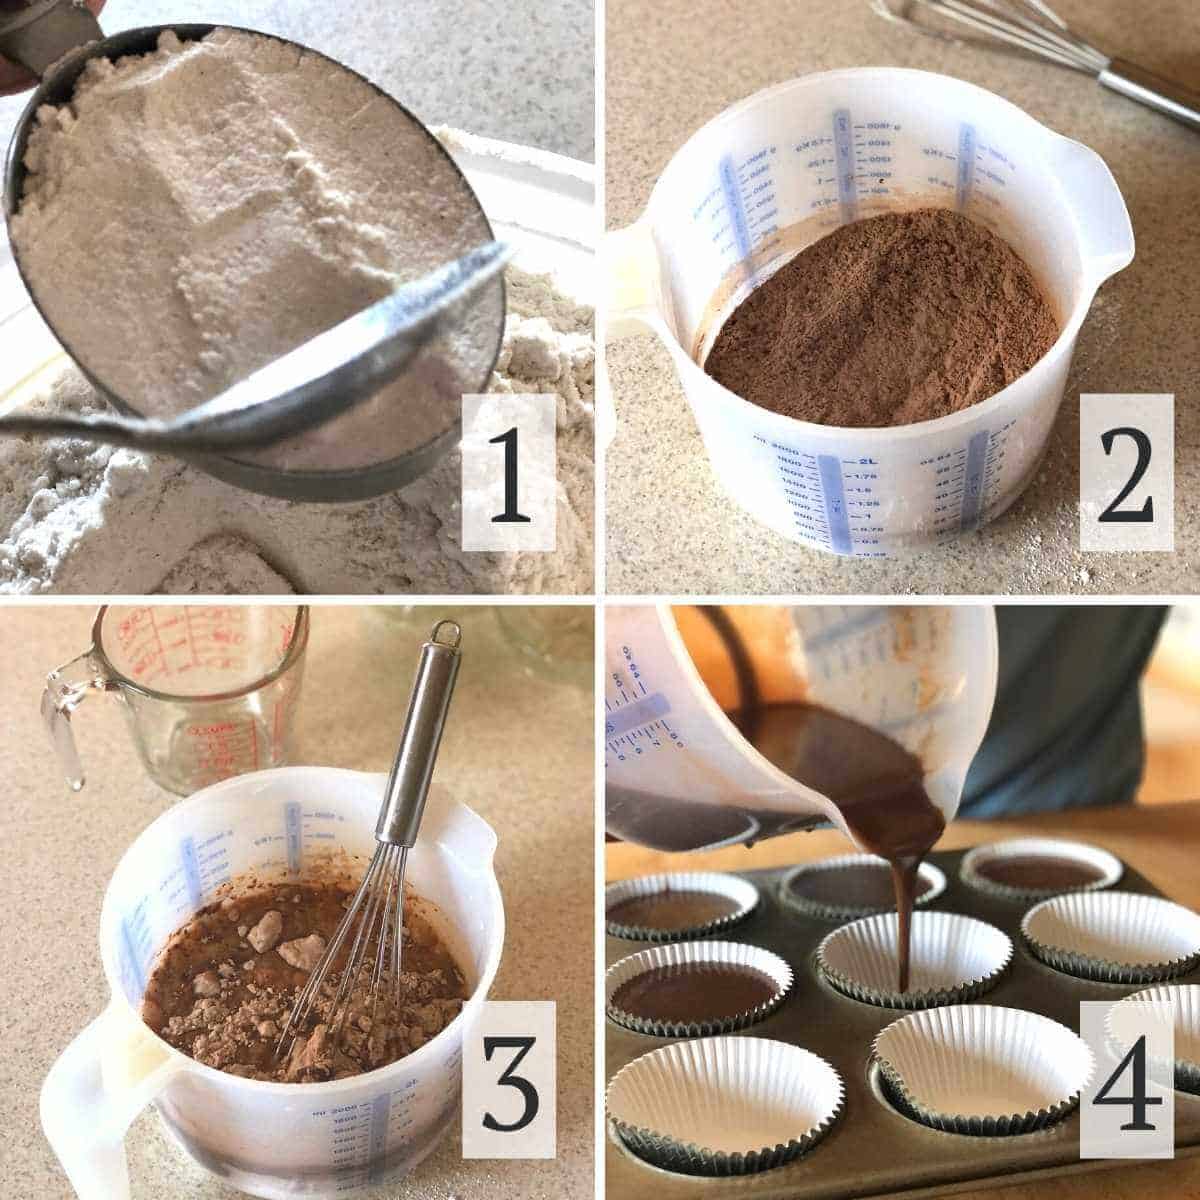 Steps for making chocolate dairy free cupcakes